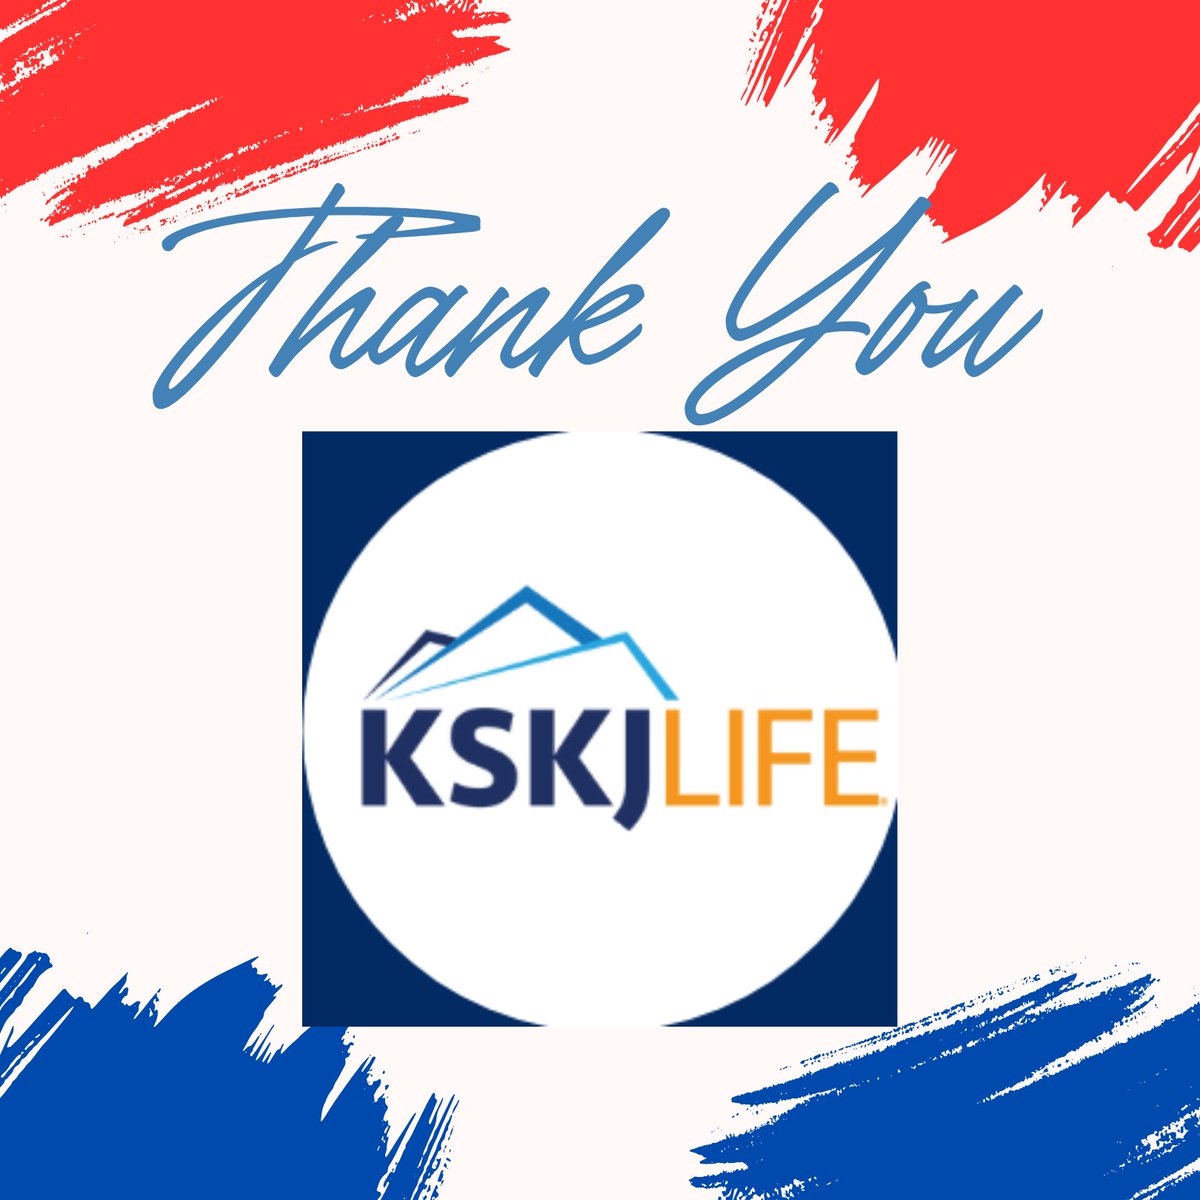 Thank you to KSKJ St. Joseph #53, Waukegan IL, for their $250 donation to Lake County Honor Flight! We're grateful for your support!
#Gratitude #SupportOurVets #VeteransHonor